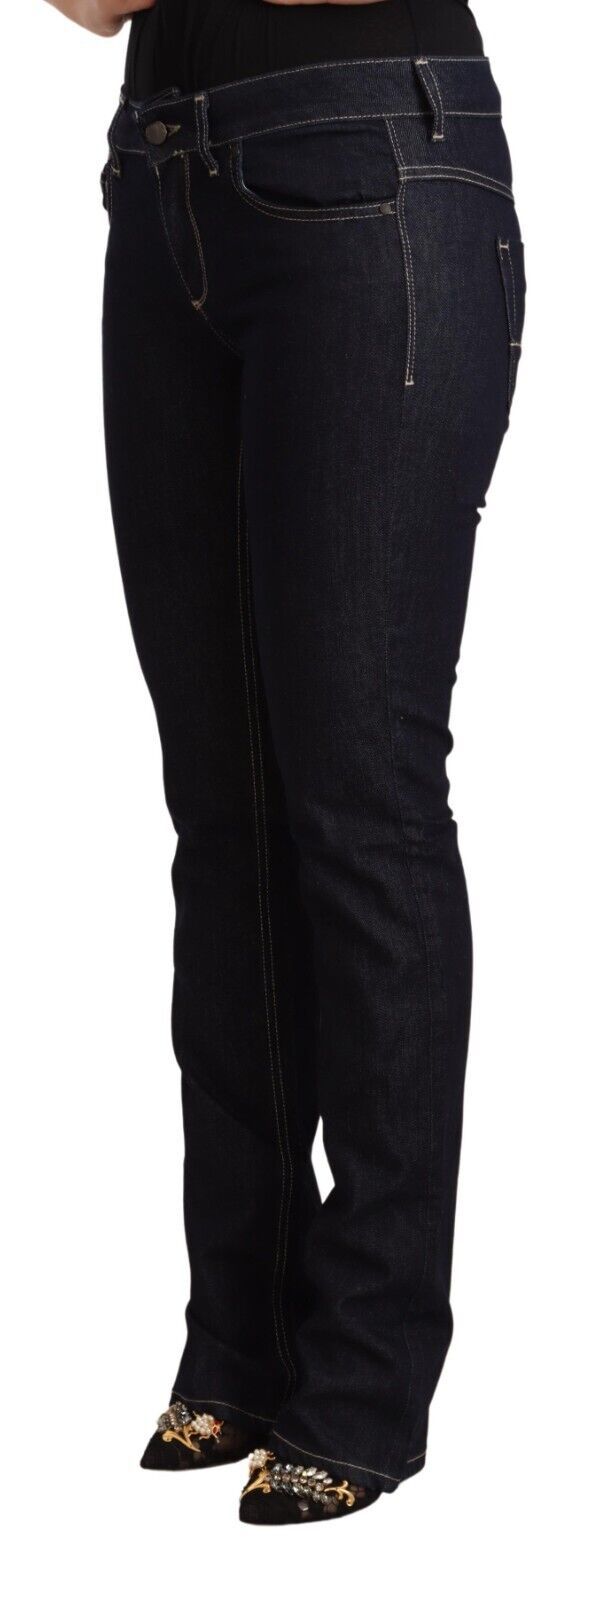 Chic Low Waist Skinny Jeans in Timeless Black